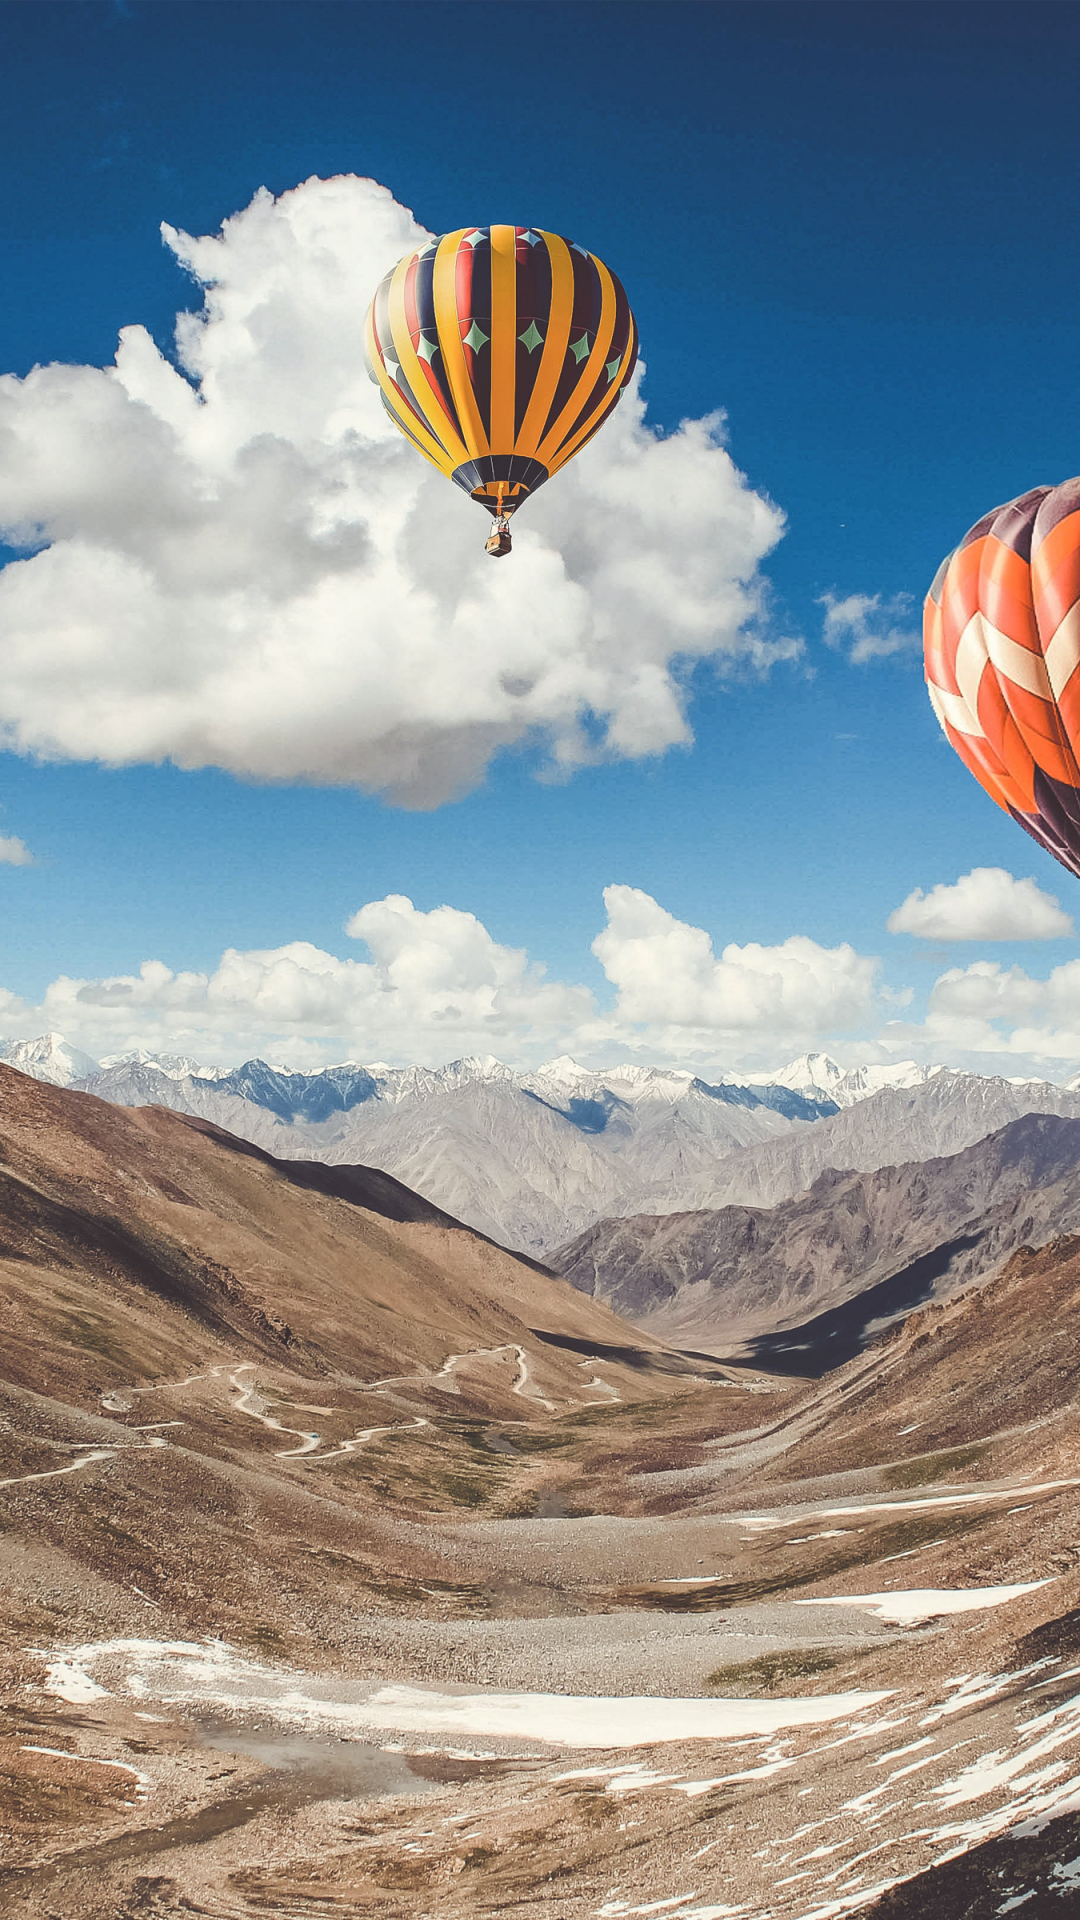 Download wallpaper 1080x1920 hot air balloon, ride, leh, mountains, 1080p  wallpaper, samsung galaxy s4, s5, note, sony xperia z, z1, z2, z3, htc one,  lenovo vibe, google pixel 2, oneplus 5, honor